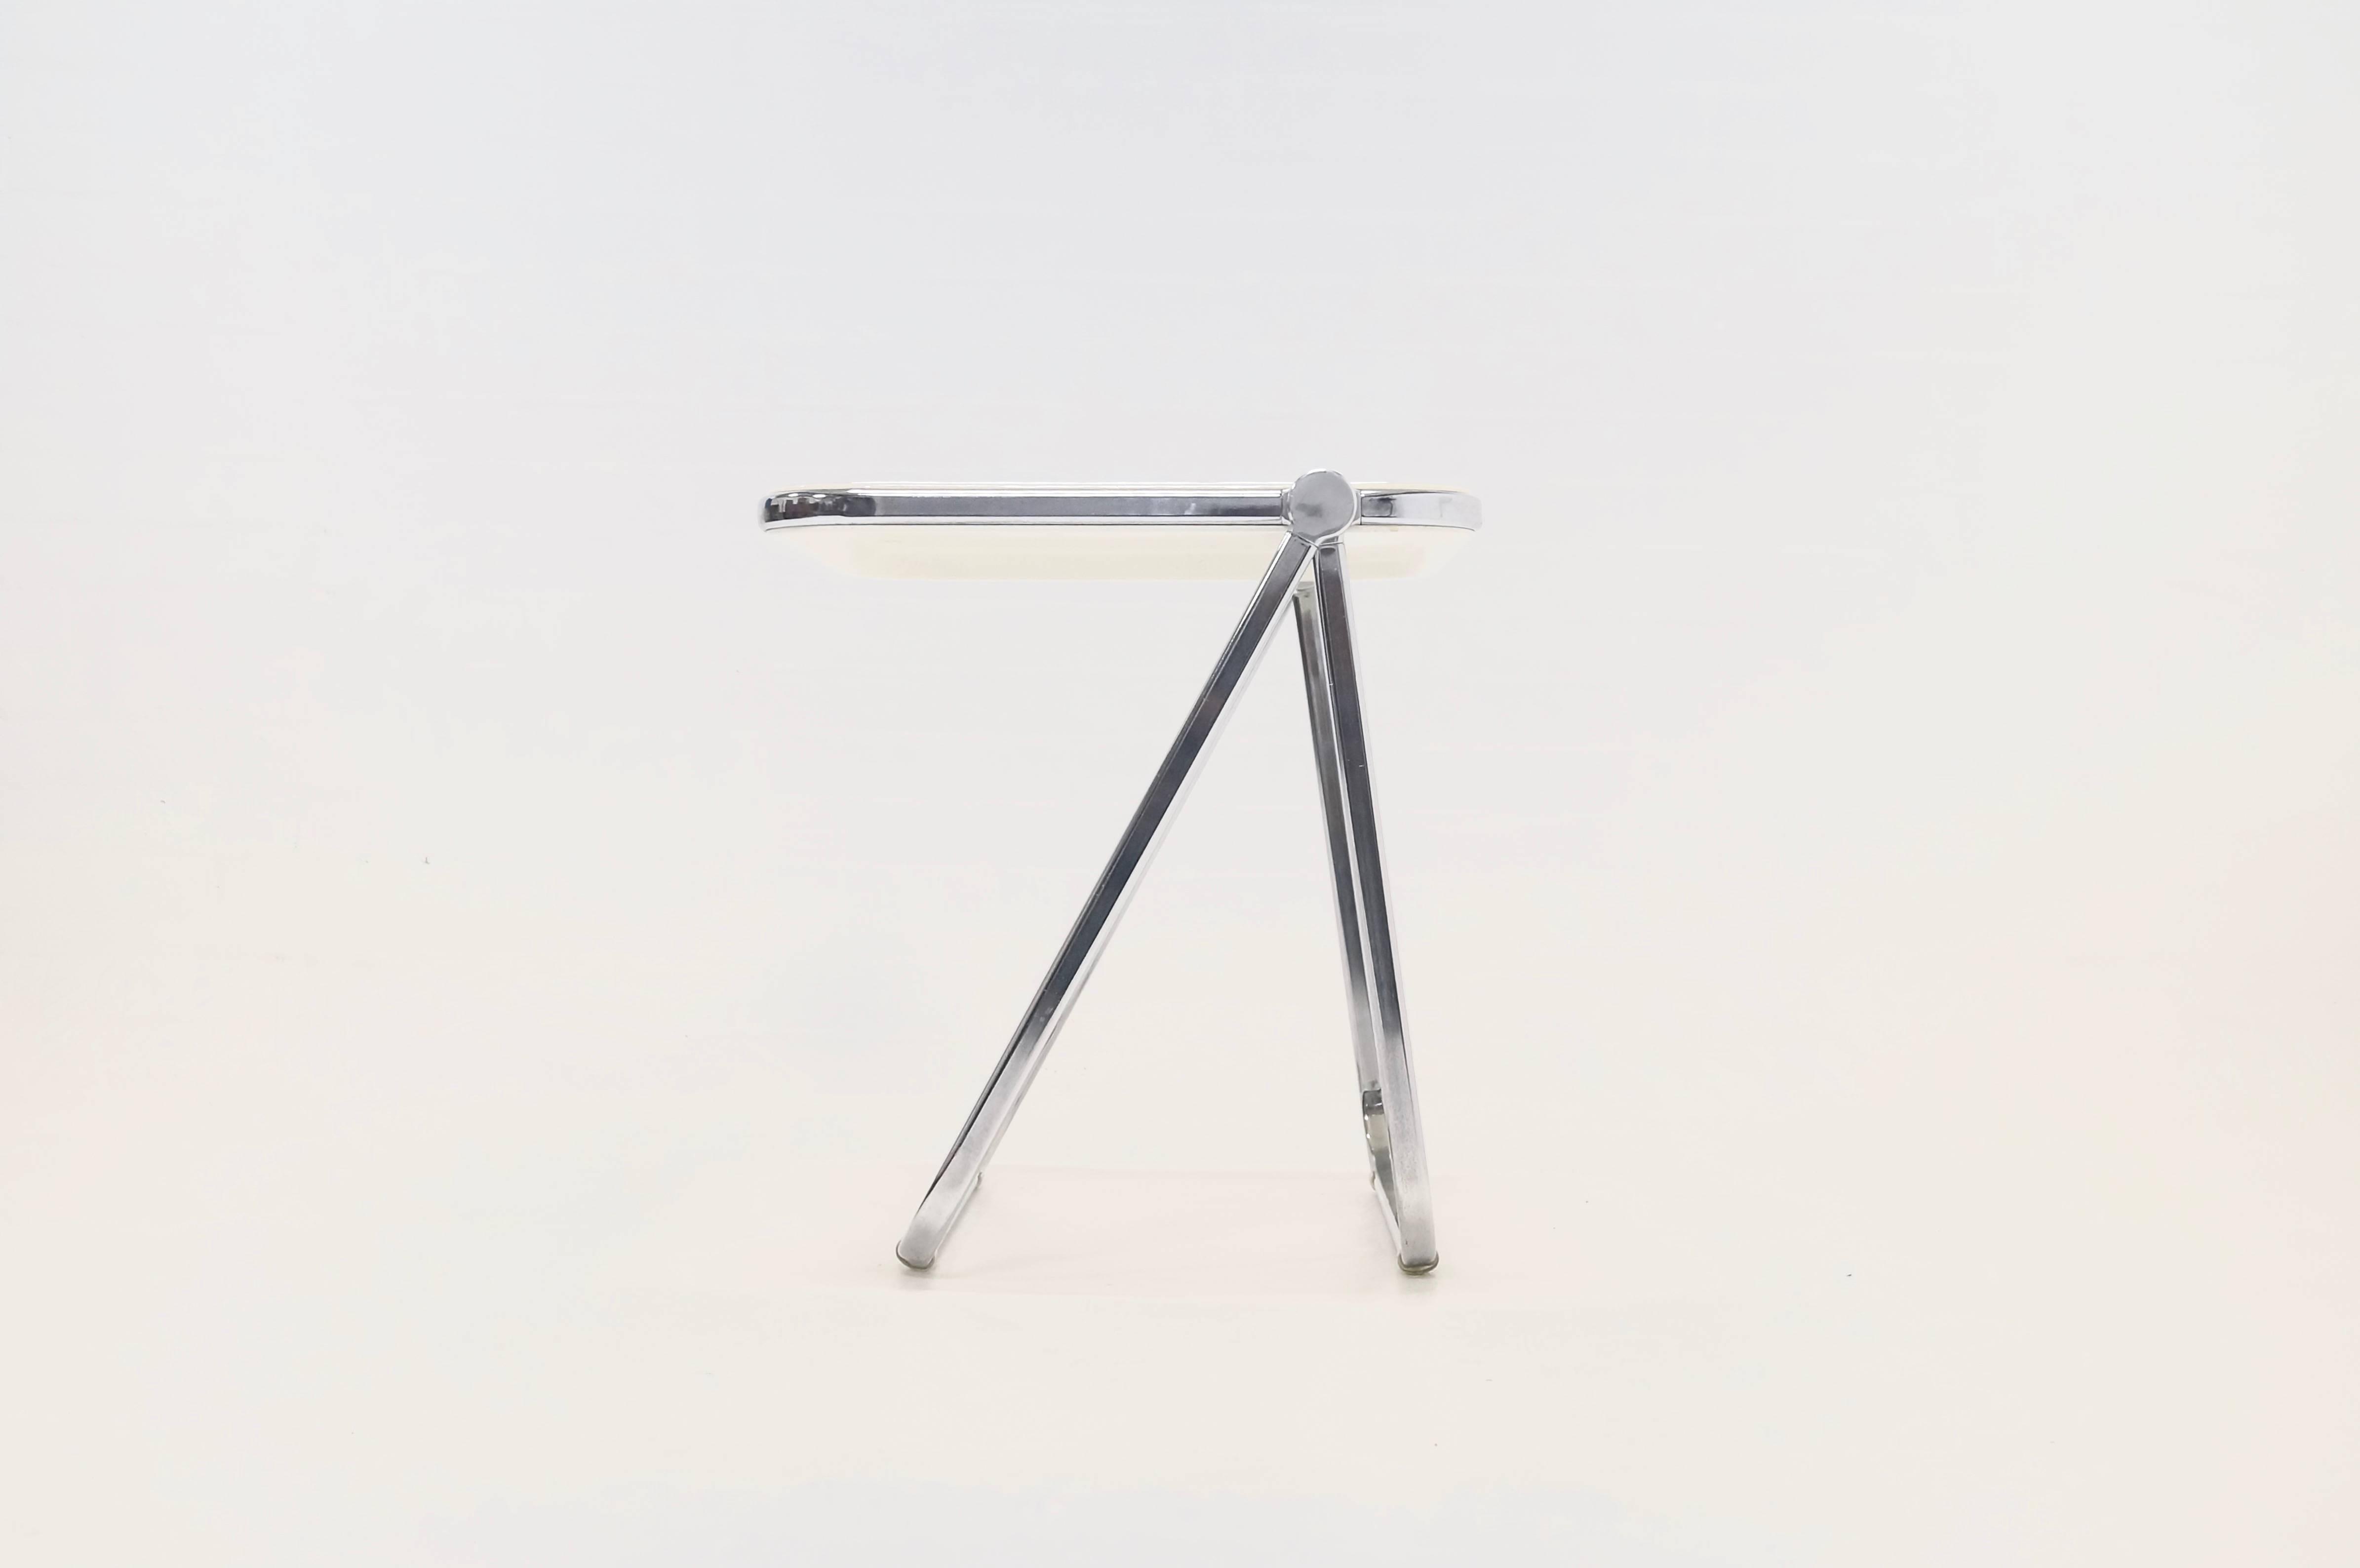 Mid-Century 'Platone' folding desk by Giancarlo Piretti for Castelli, Italy. Off-white ABS plastic with a heavy chromed steel base.